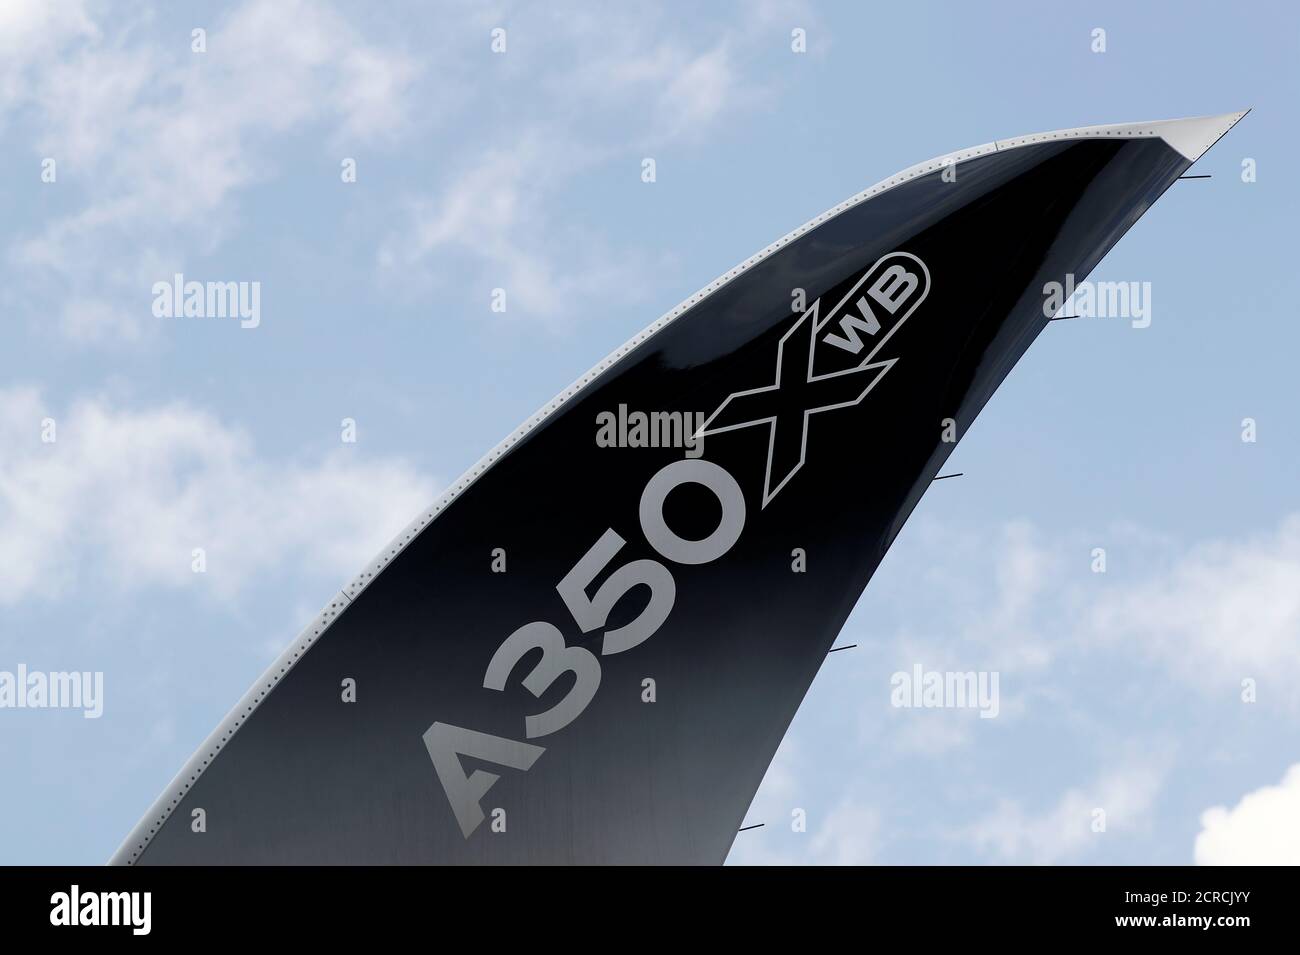 An Airbus A350-1000 is displayed during a media preview at the Singapore Airshow February 4, 2018. REUTERS/Edgar Su Stock Photo